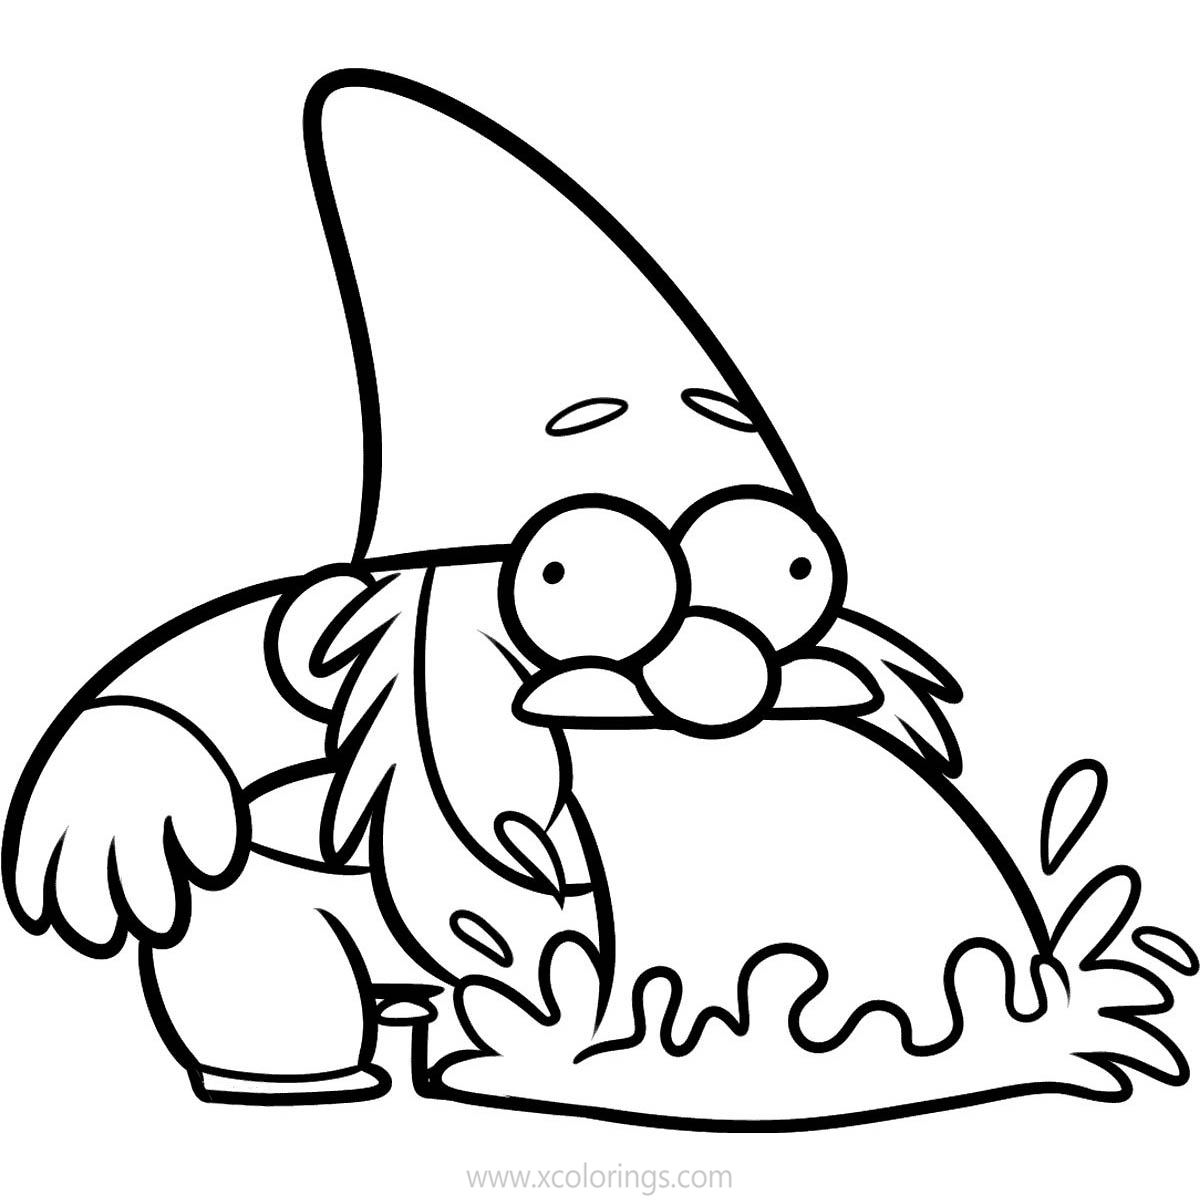 Free Gravity Falls Coloring Pages Gnomes printable